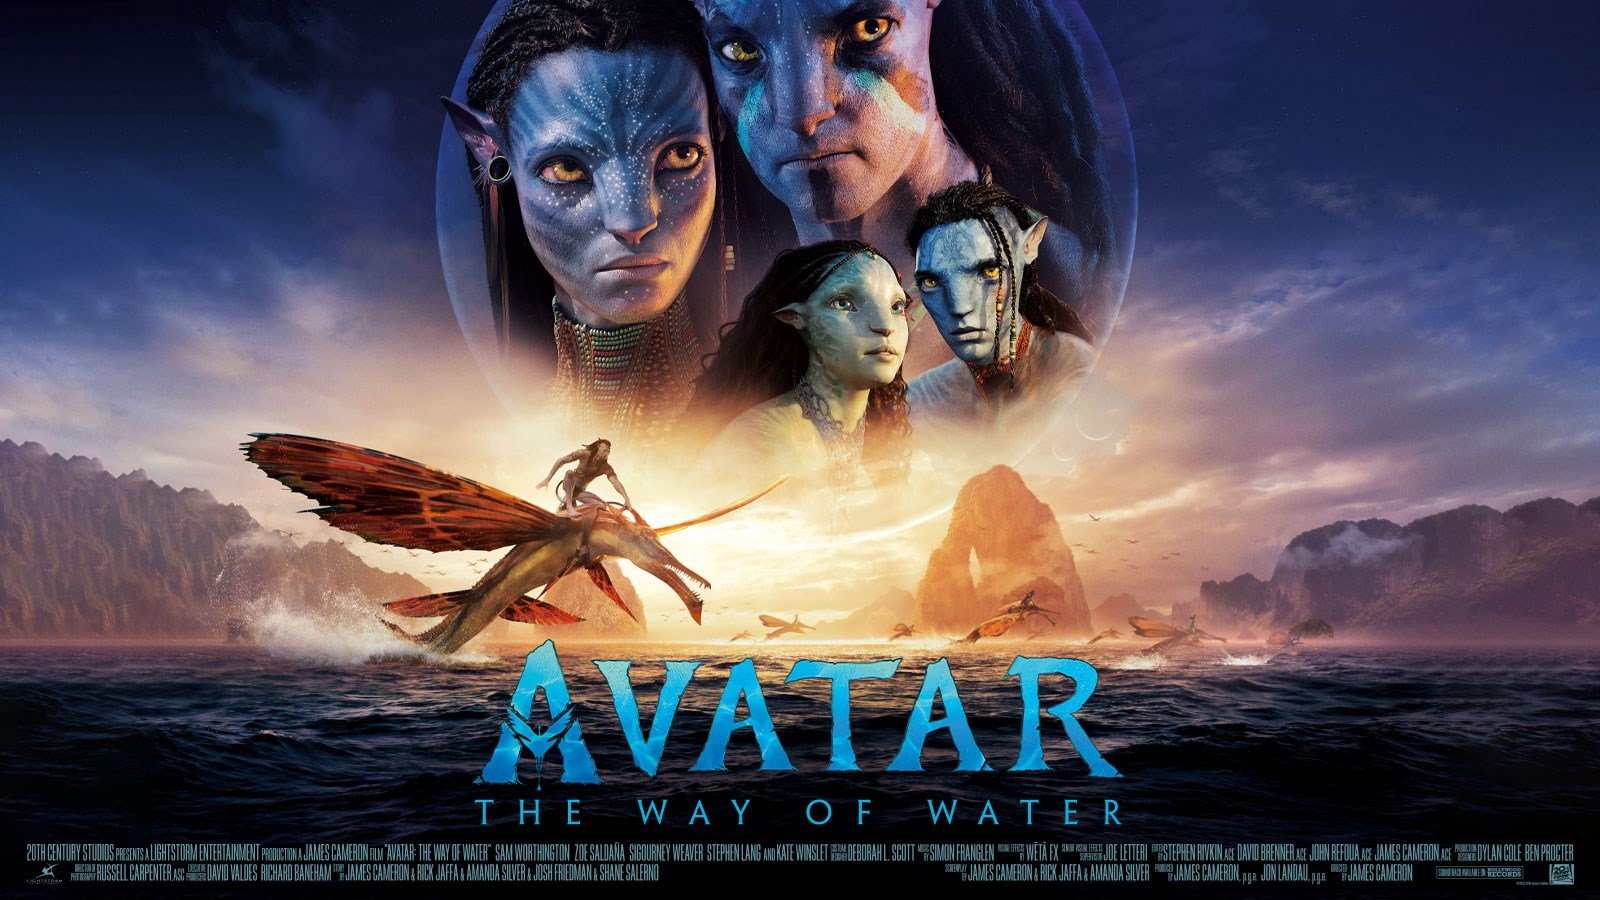 Avatar Movie Review A complete cinematic experience